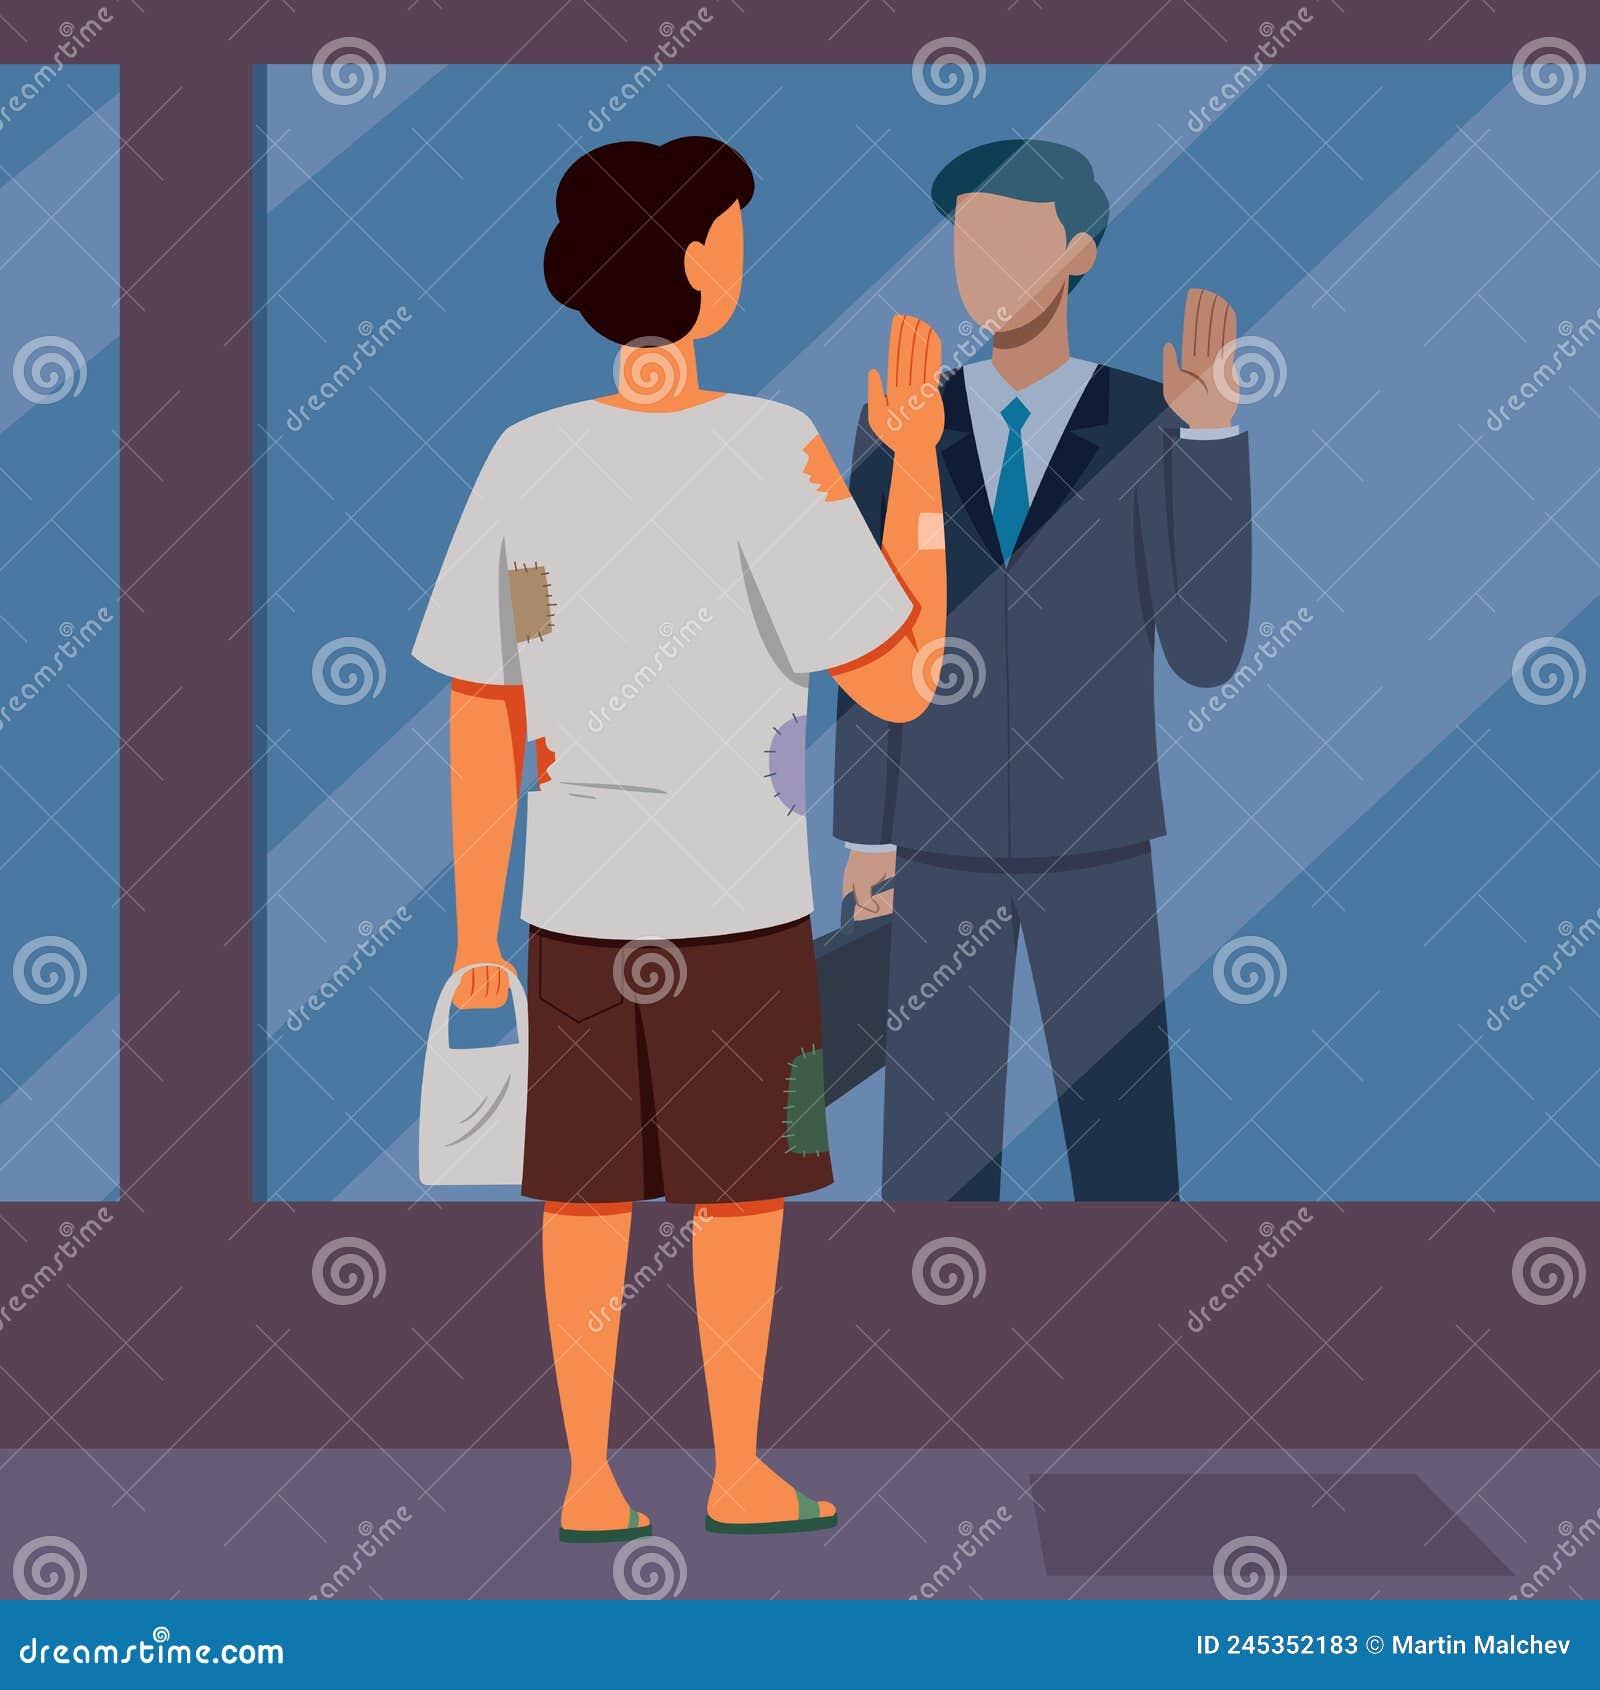 Rags to Riches stock vector. Illustration of concept - 245352183